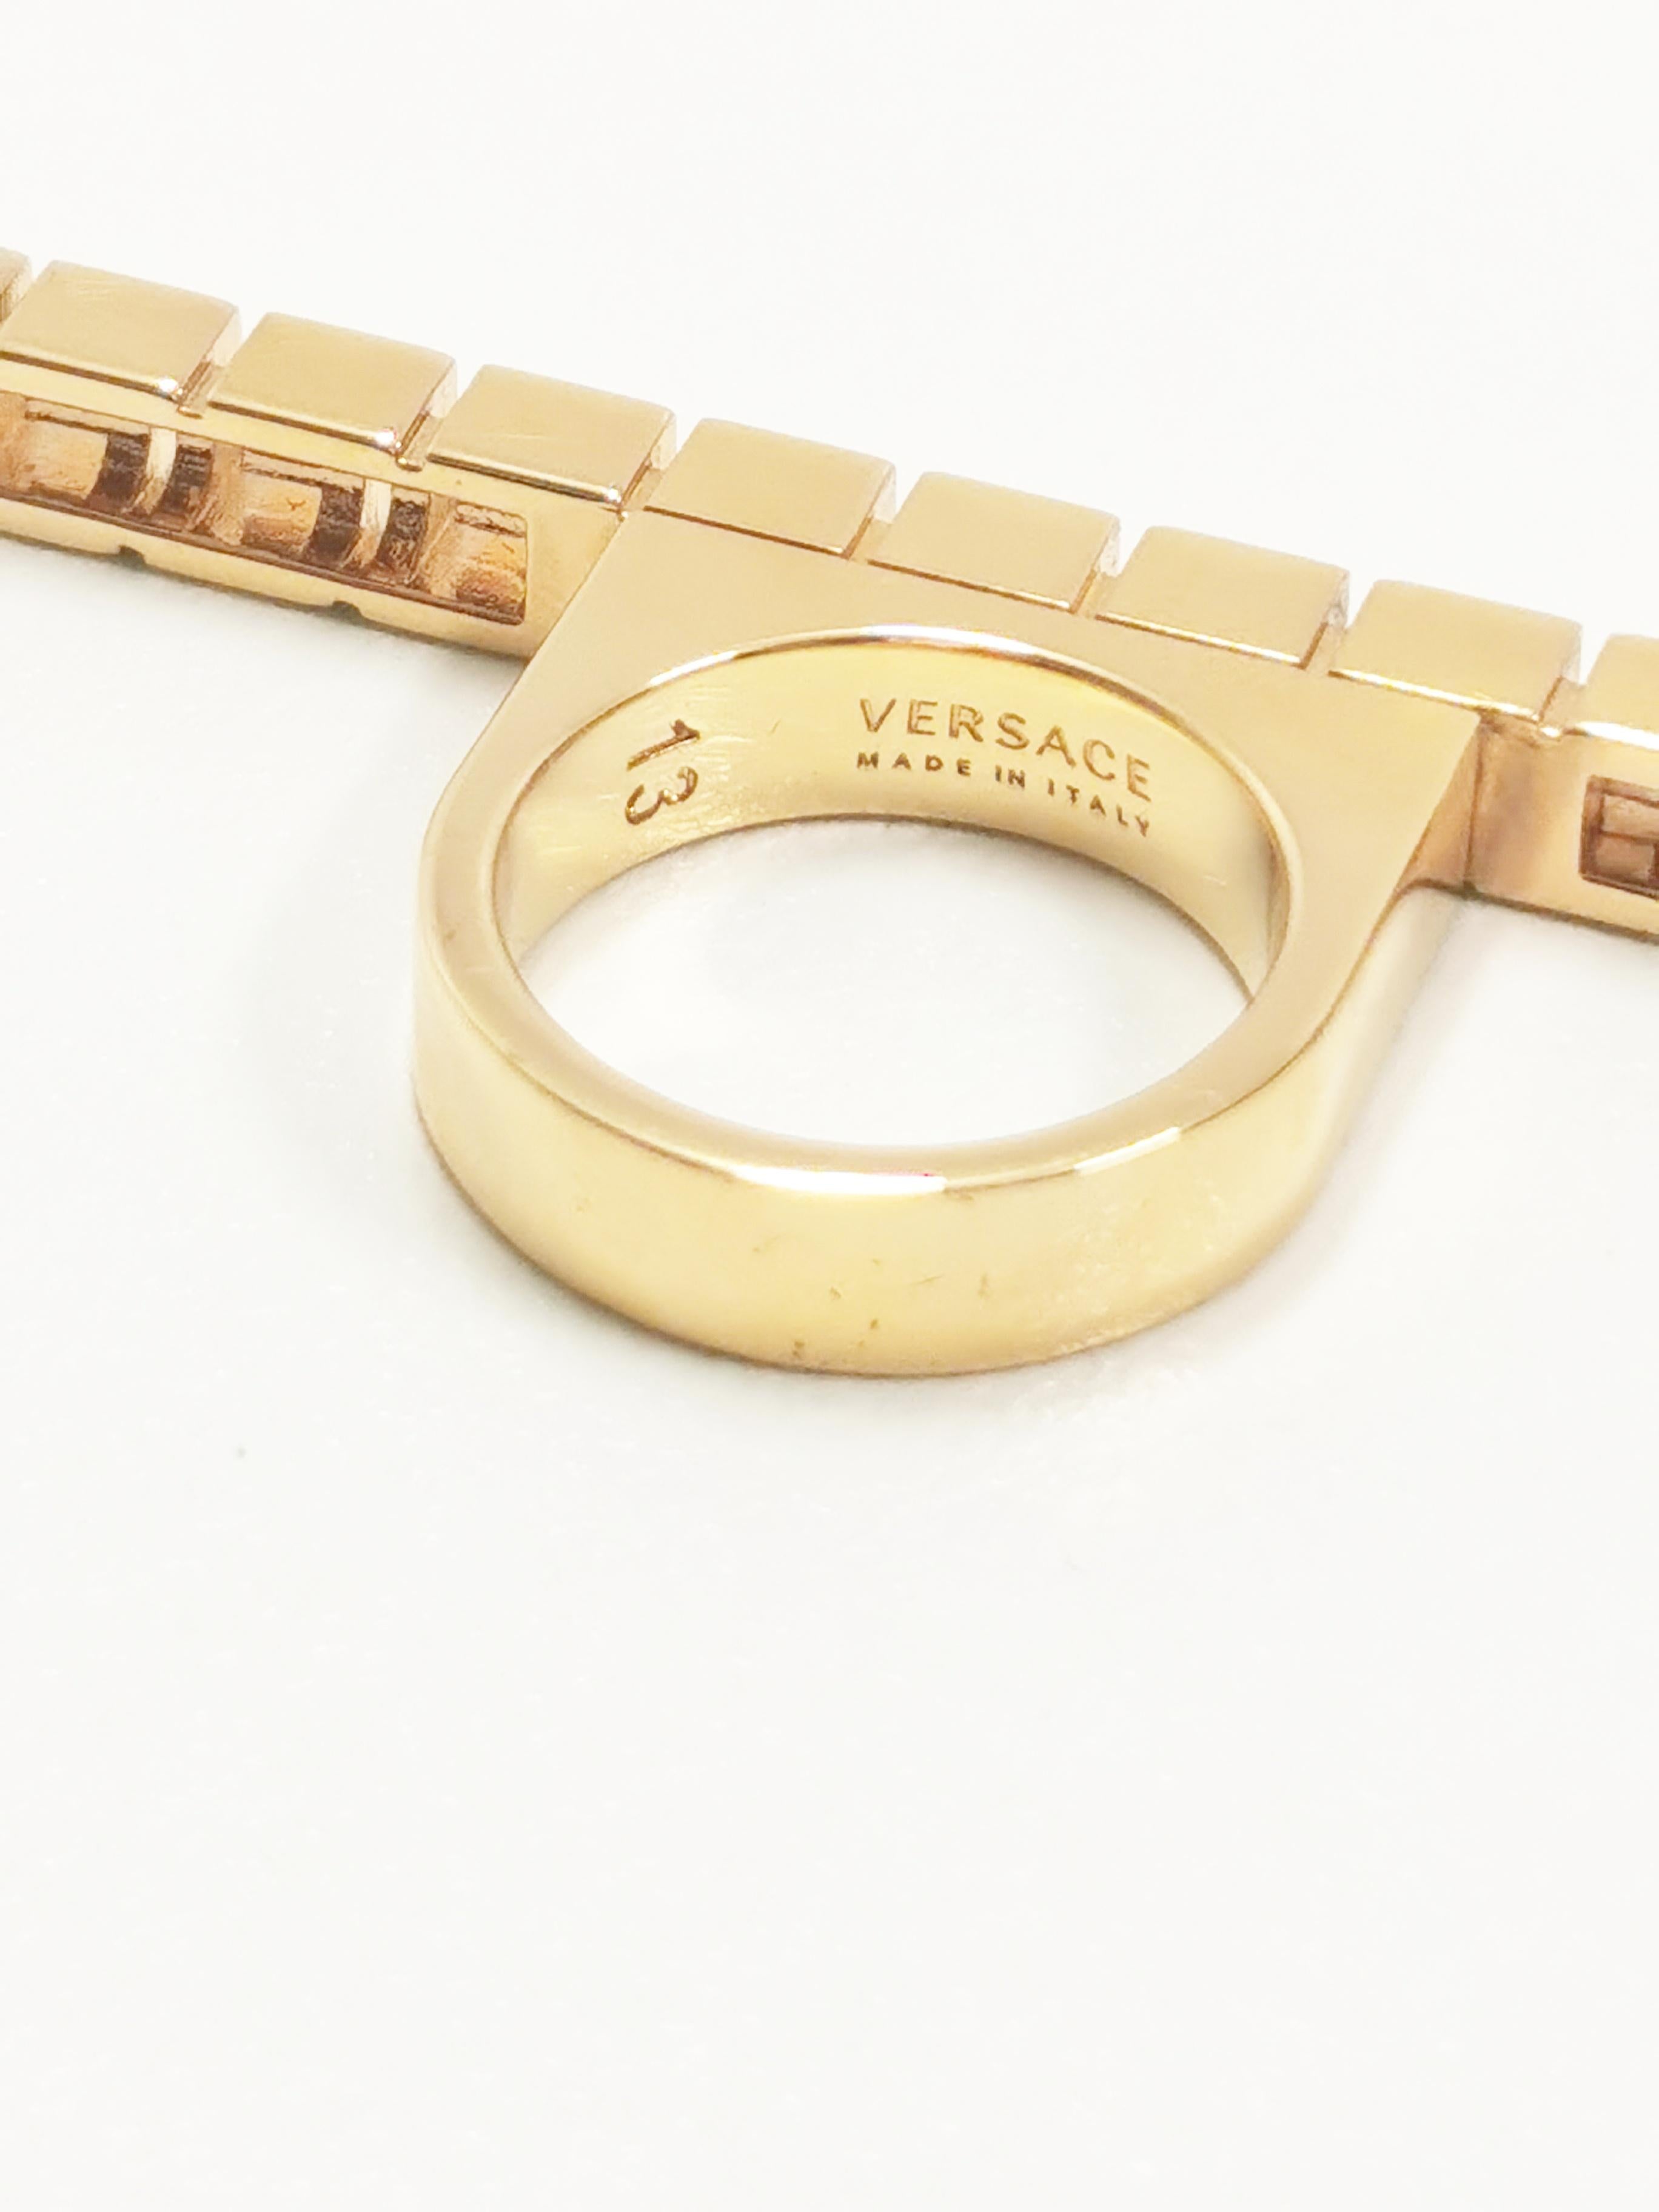 Contemporary Versace Gold Greca Long Bar Women's Ring in IT 13 Brand new in Box For Sale